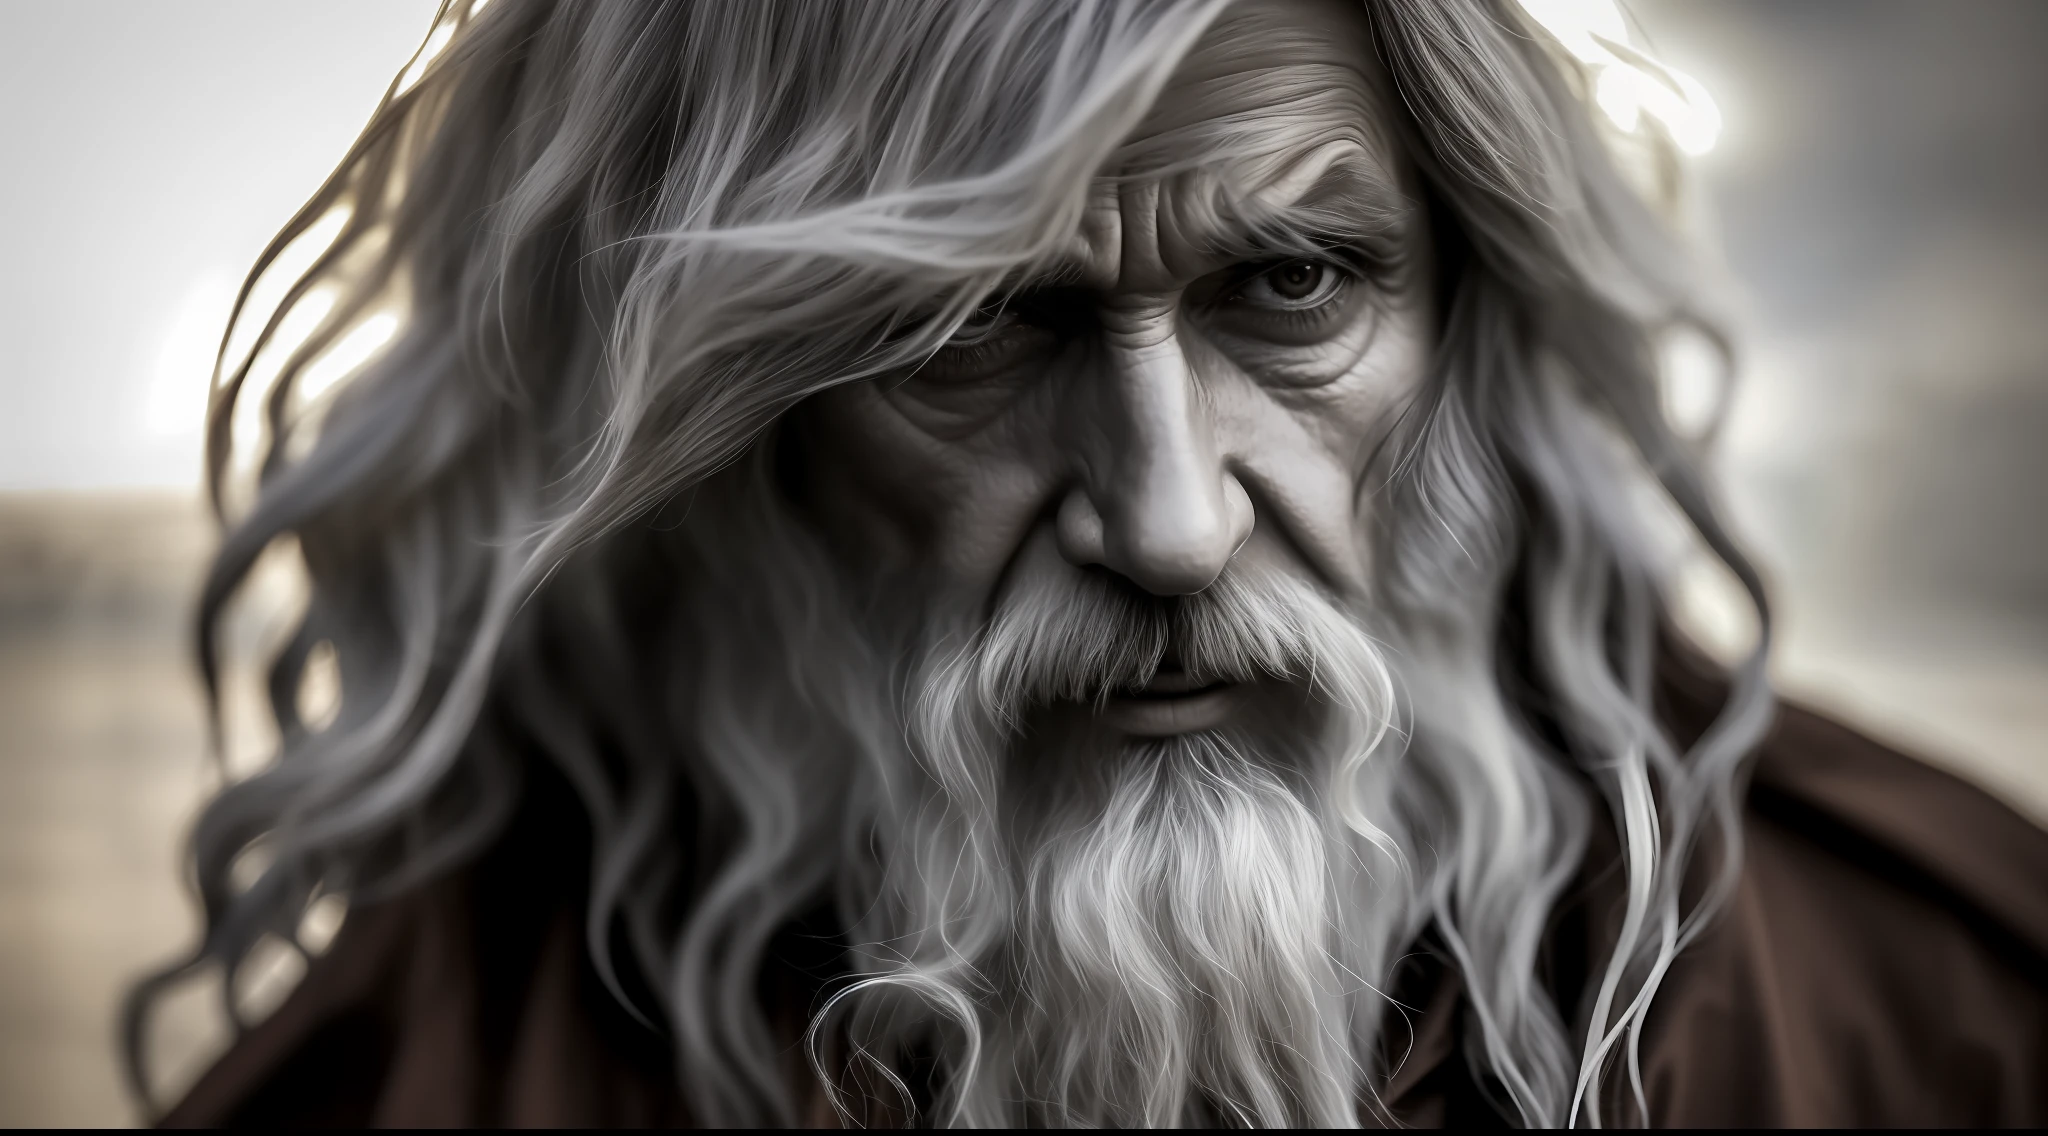 Realistic photography, closeup of white old man, dirty enoch biblical character, long gray hair, eye focus, 50mm f/1.4, hdr masterpiece, dramatic lighting, epic, hair in the wind, wearing brown tunic, israel city before christ,